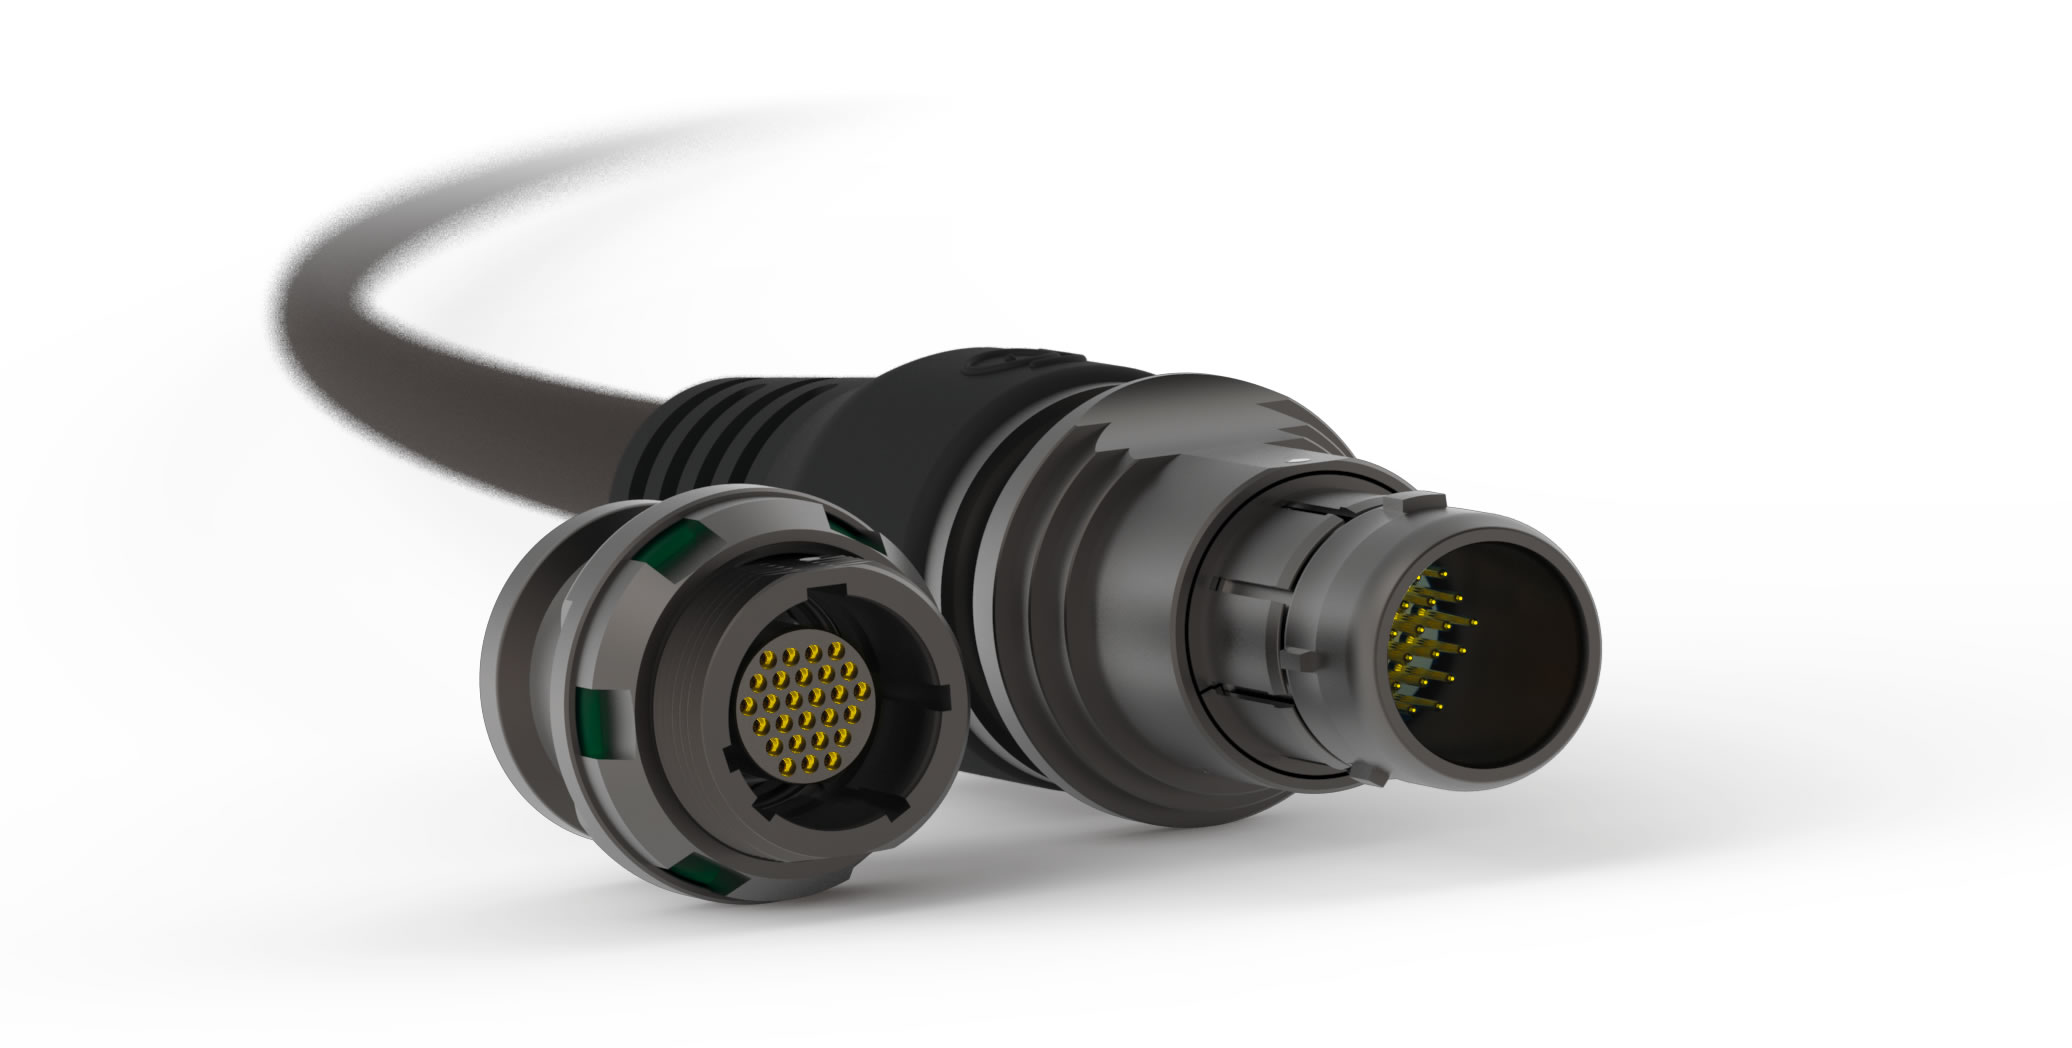 rugged connectors from Fischer Connectors